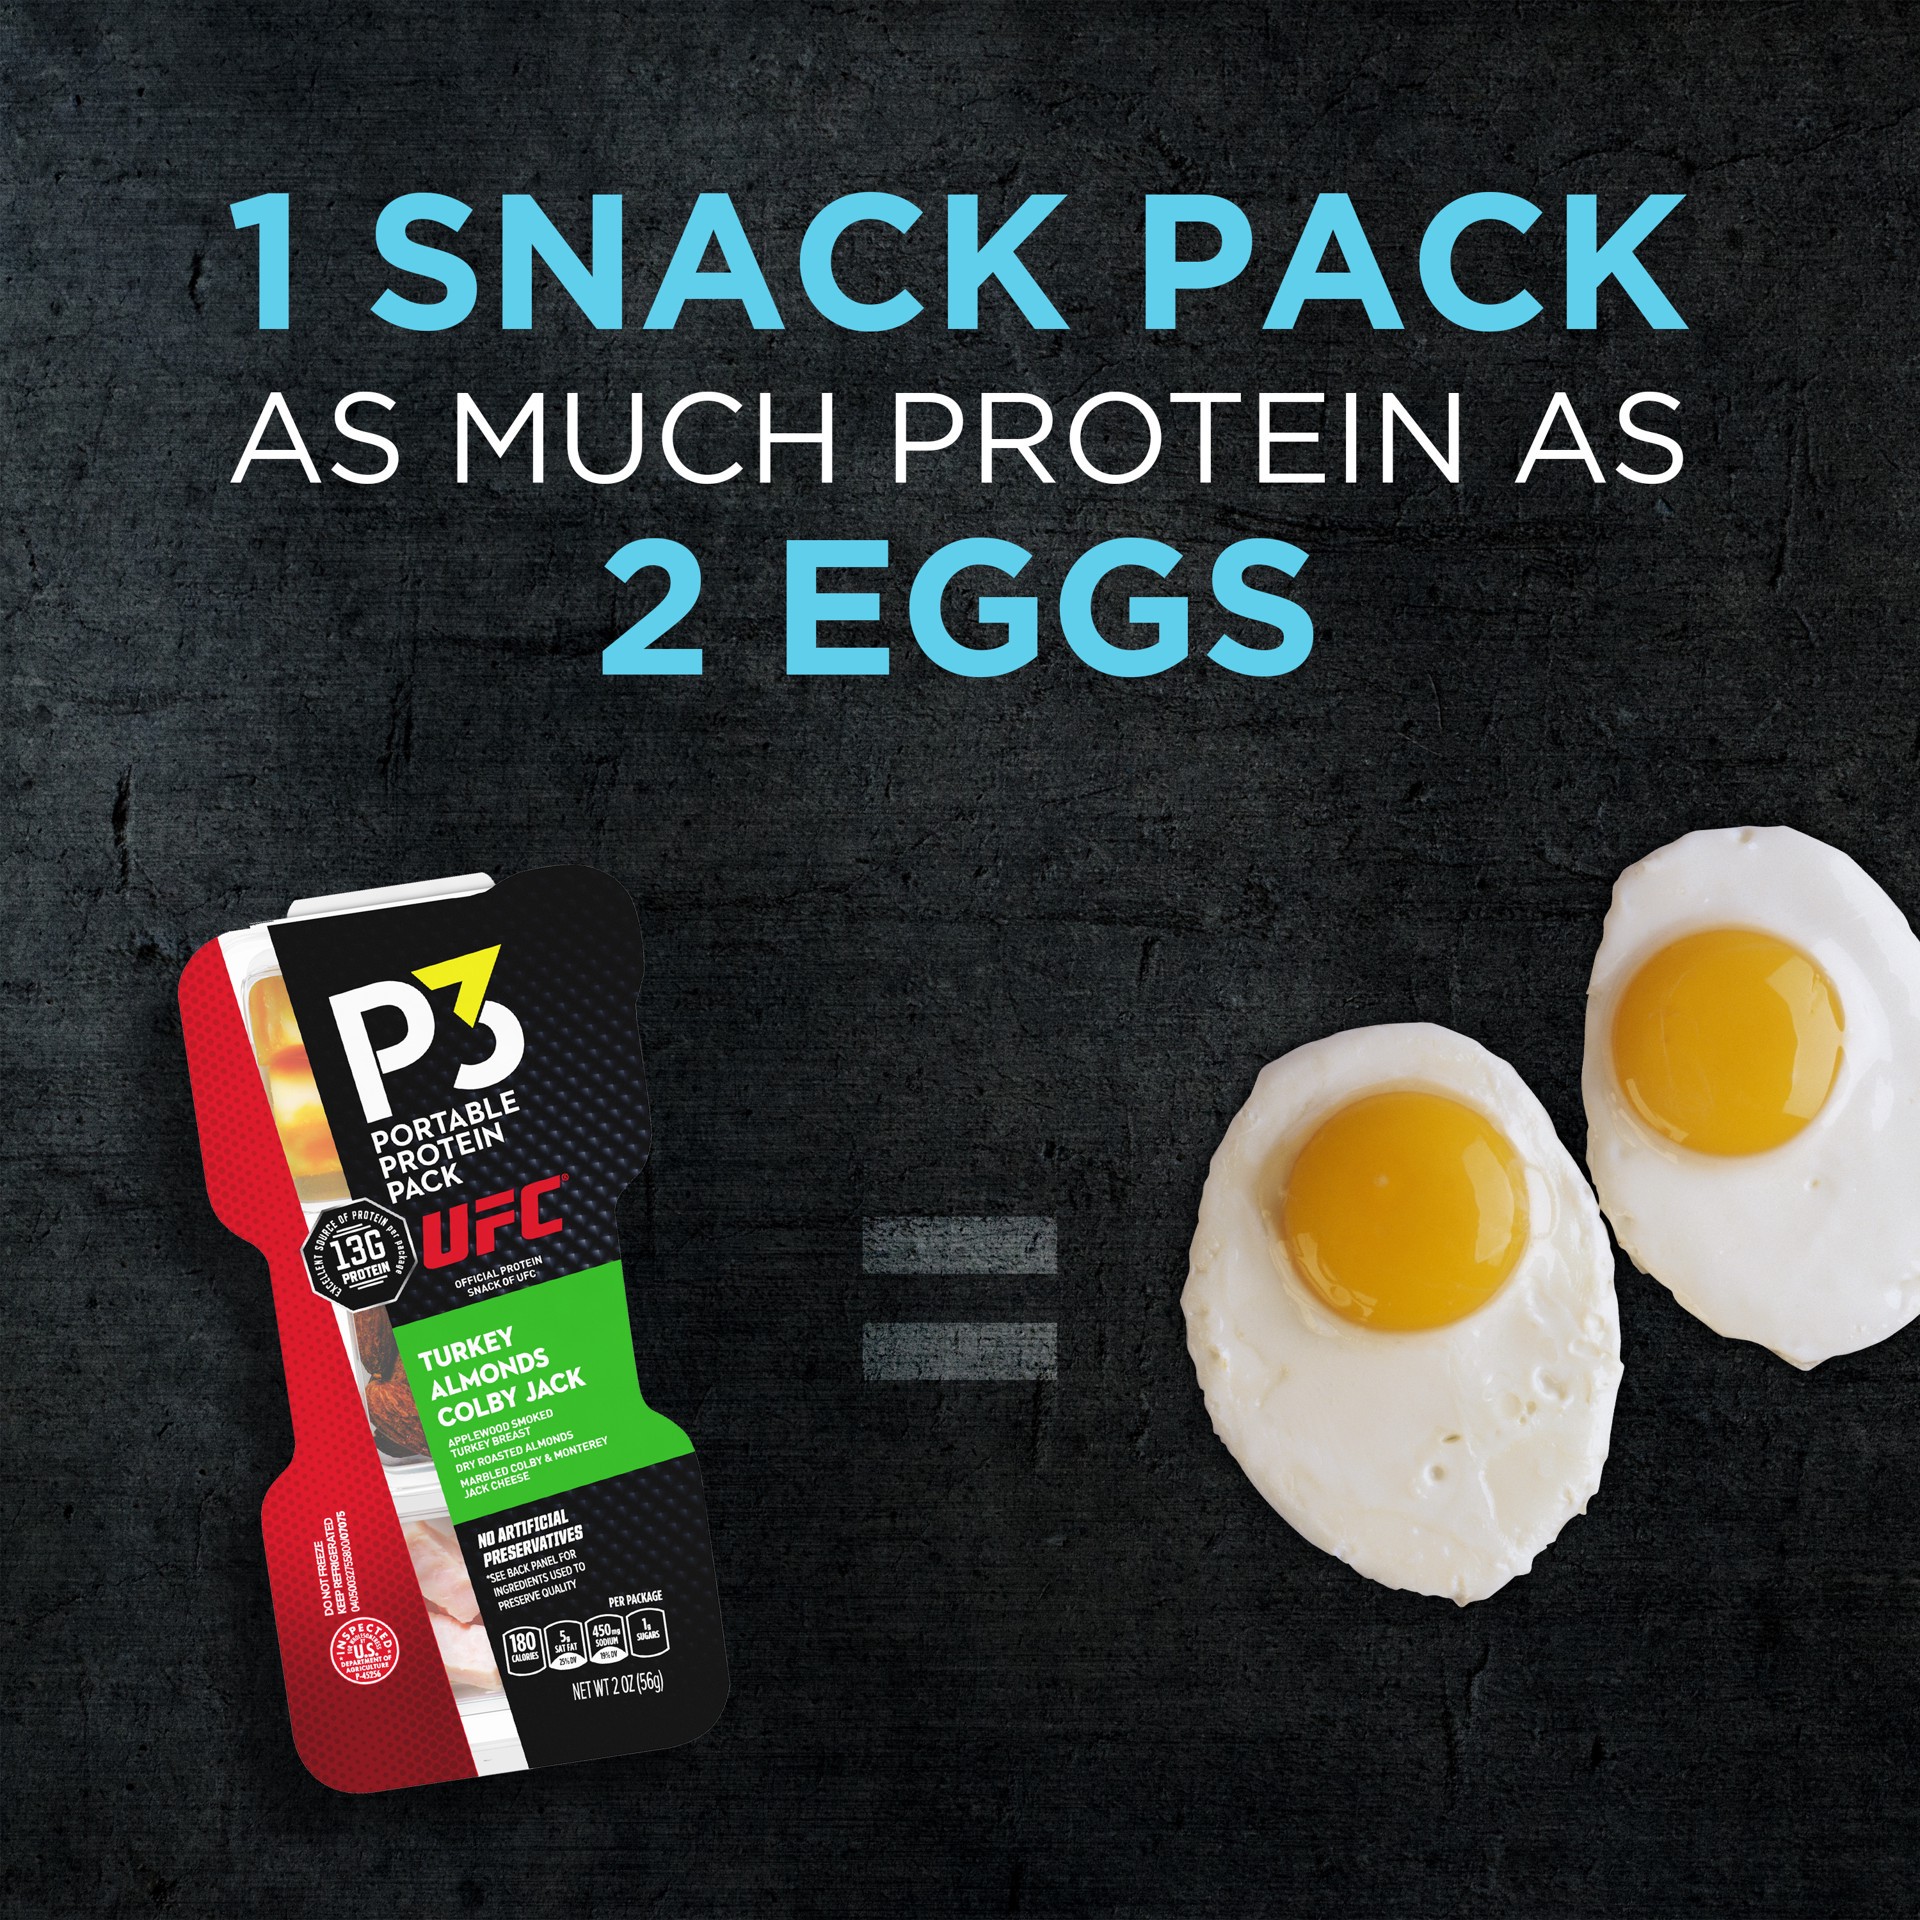 slide 13 of 14, P3 Portable Protein Snack Pack with Turkey, Almonds & Colby Jack Cheese Tray, 2 oz